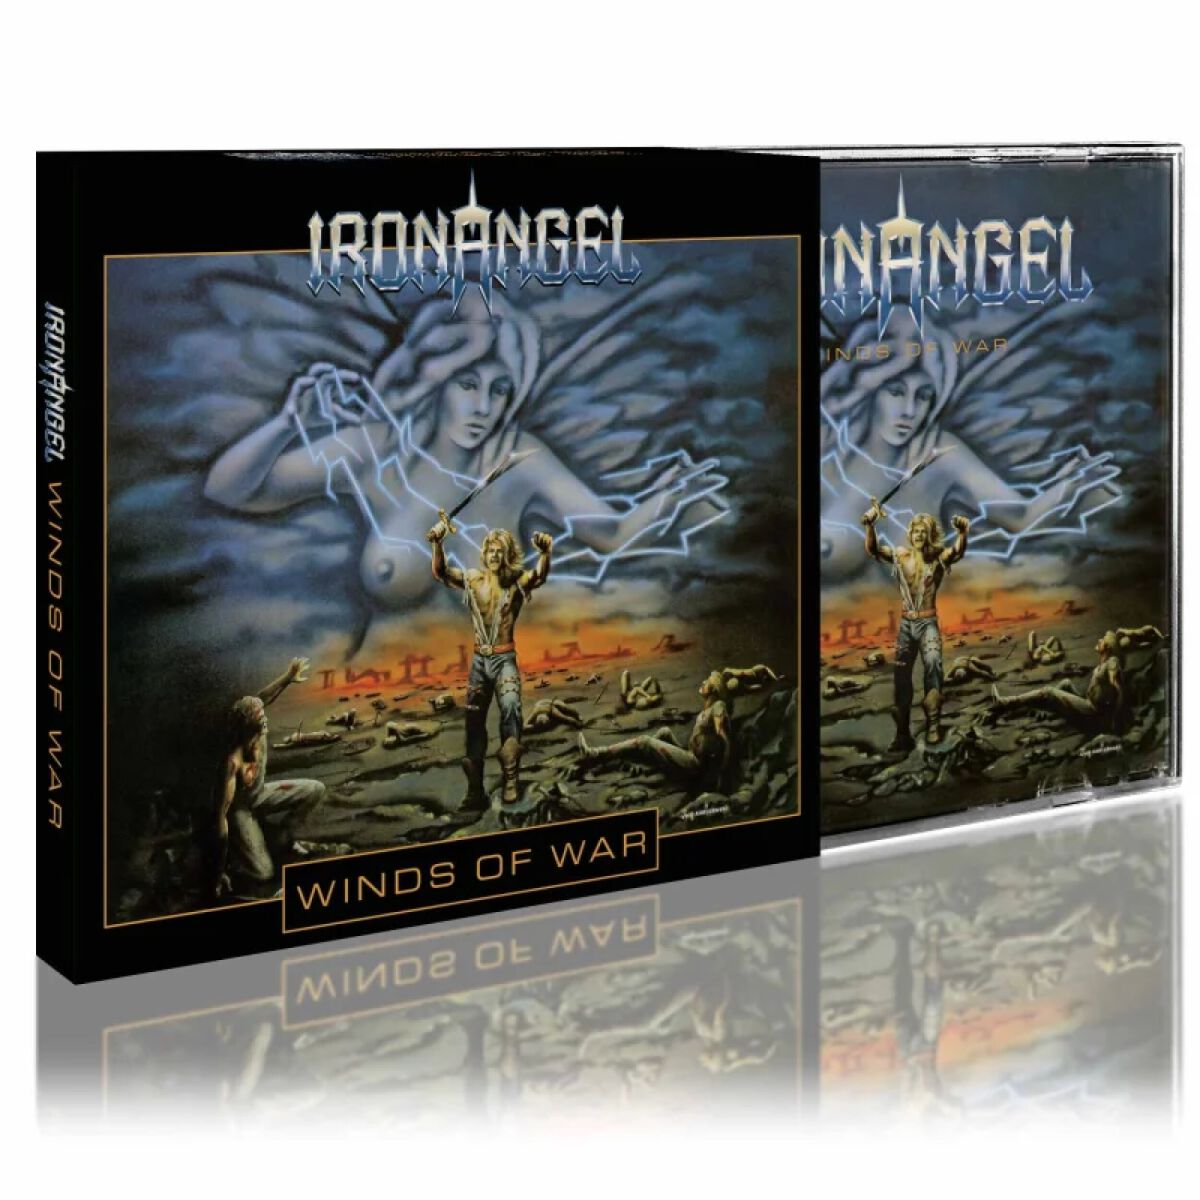 Iron Angel Winds of war CD multicolor